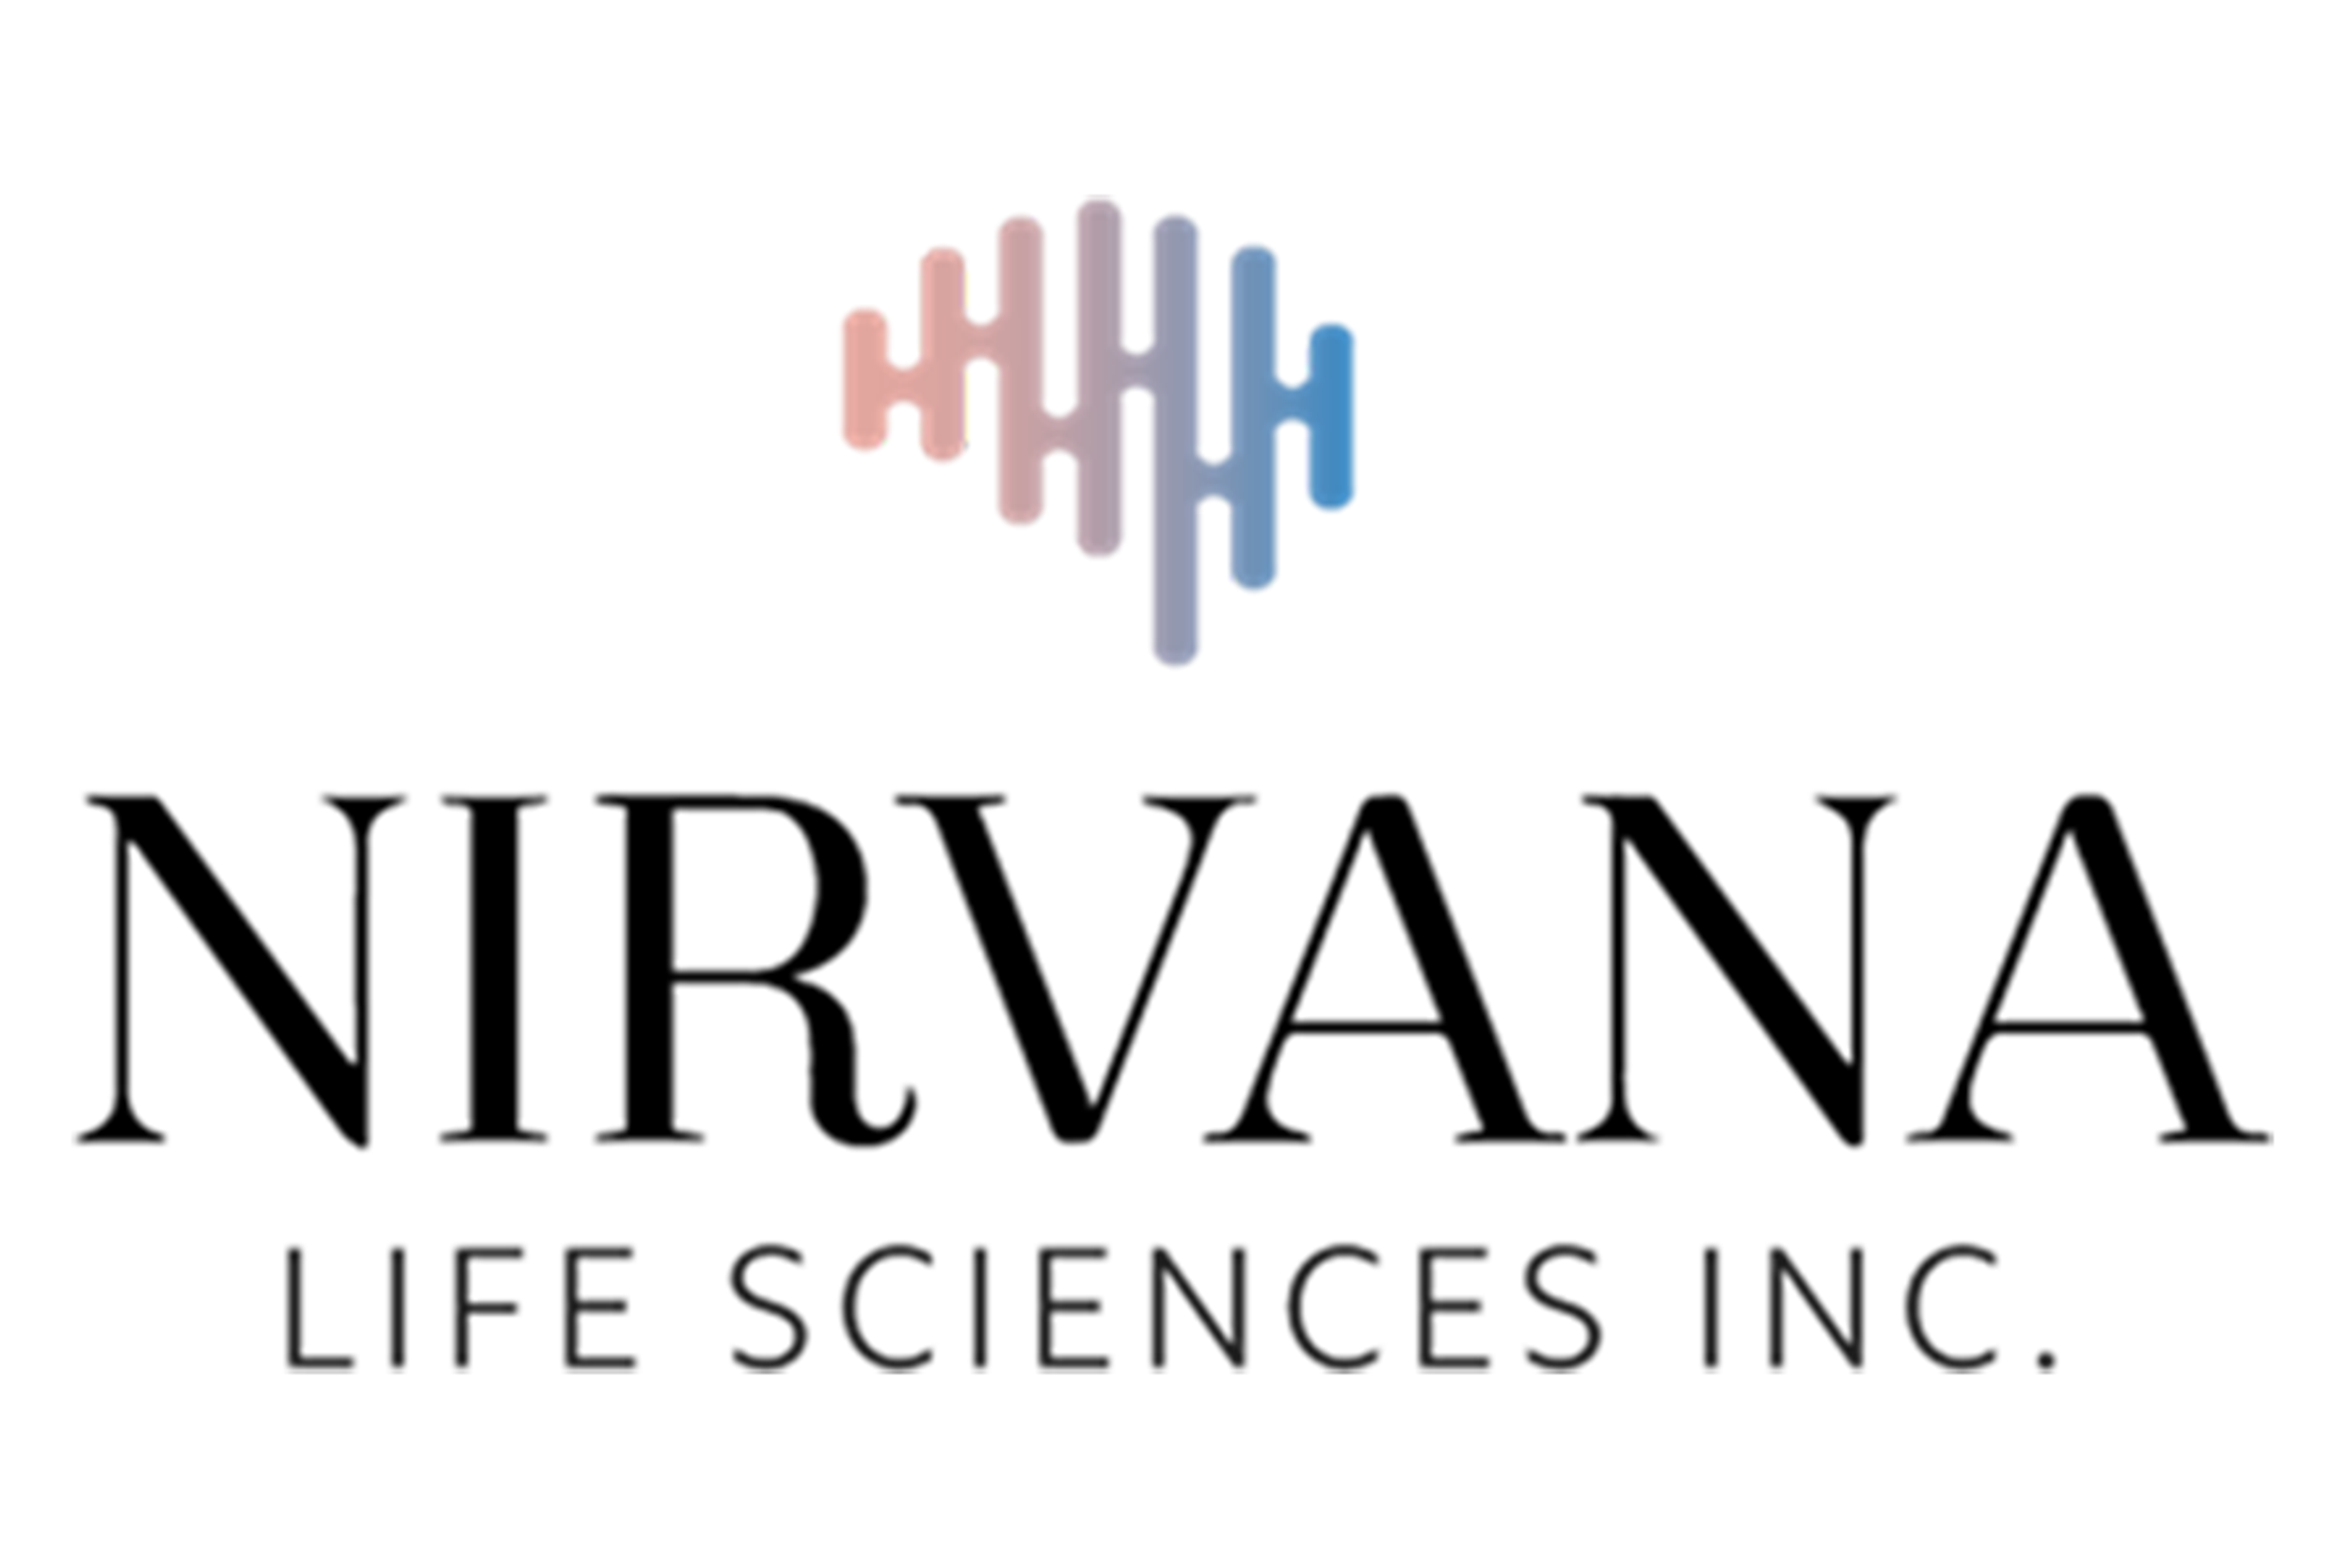 Nirvana Life Sciences Inc. Contracts Stratus Designs for Mechanical Service to Laboratory